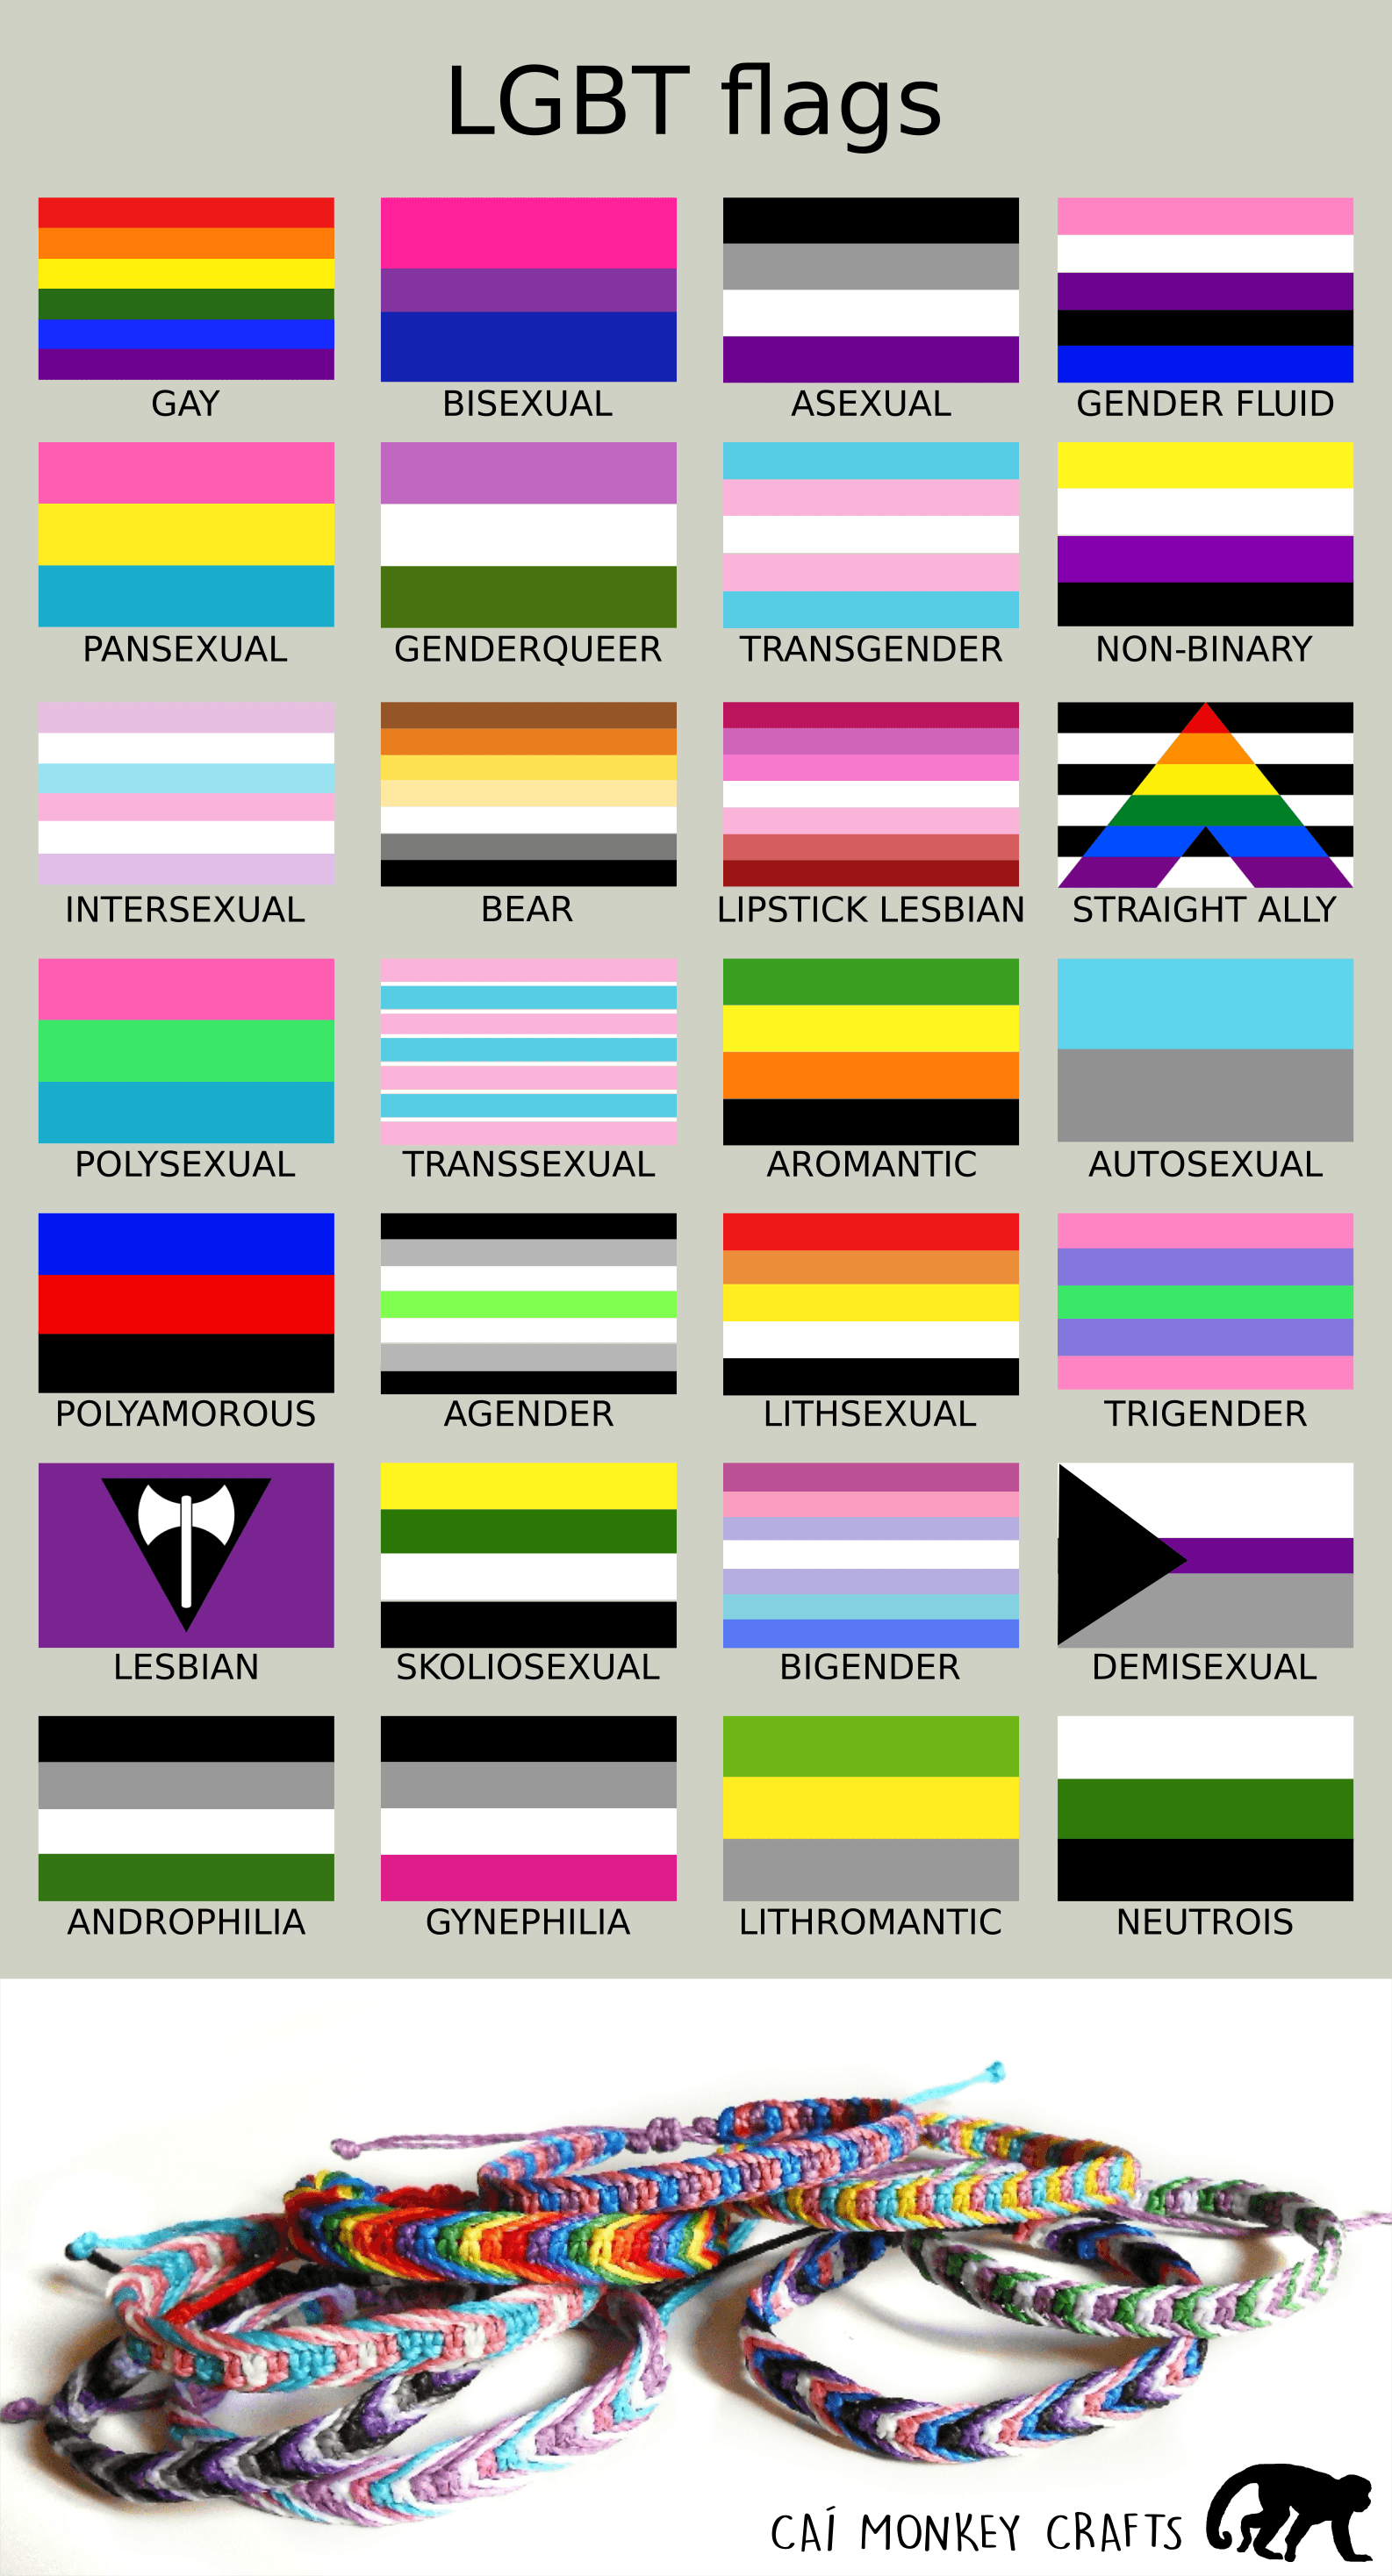 meaning of lgbt flag colors